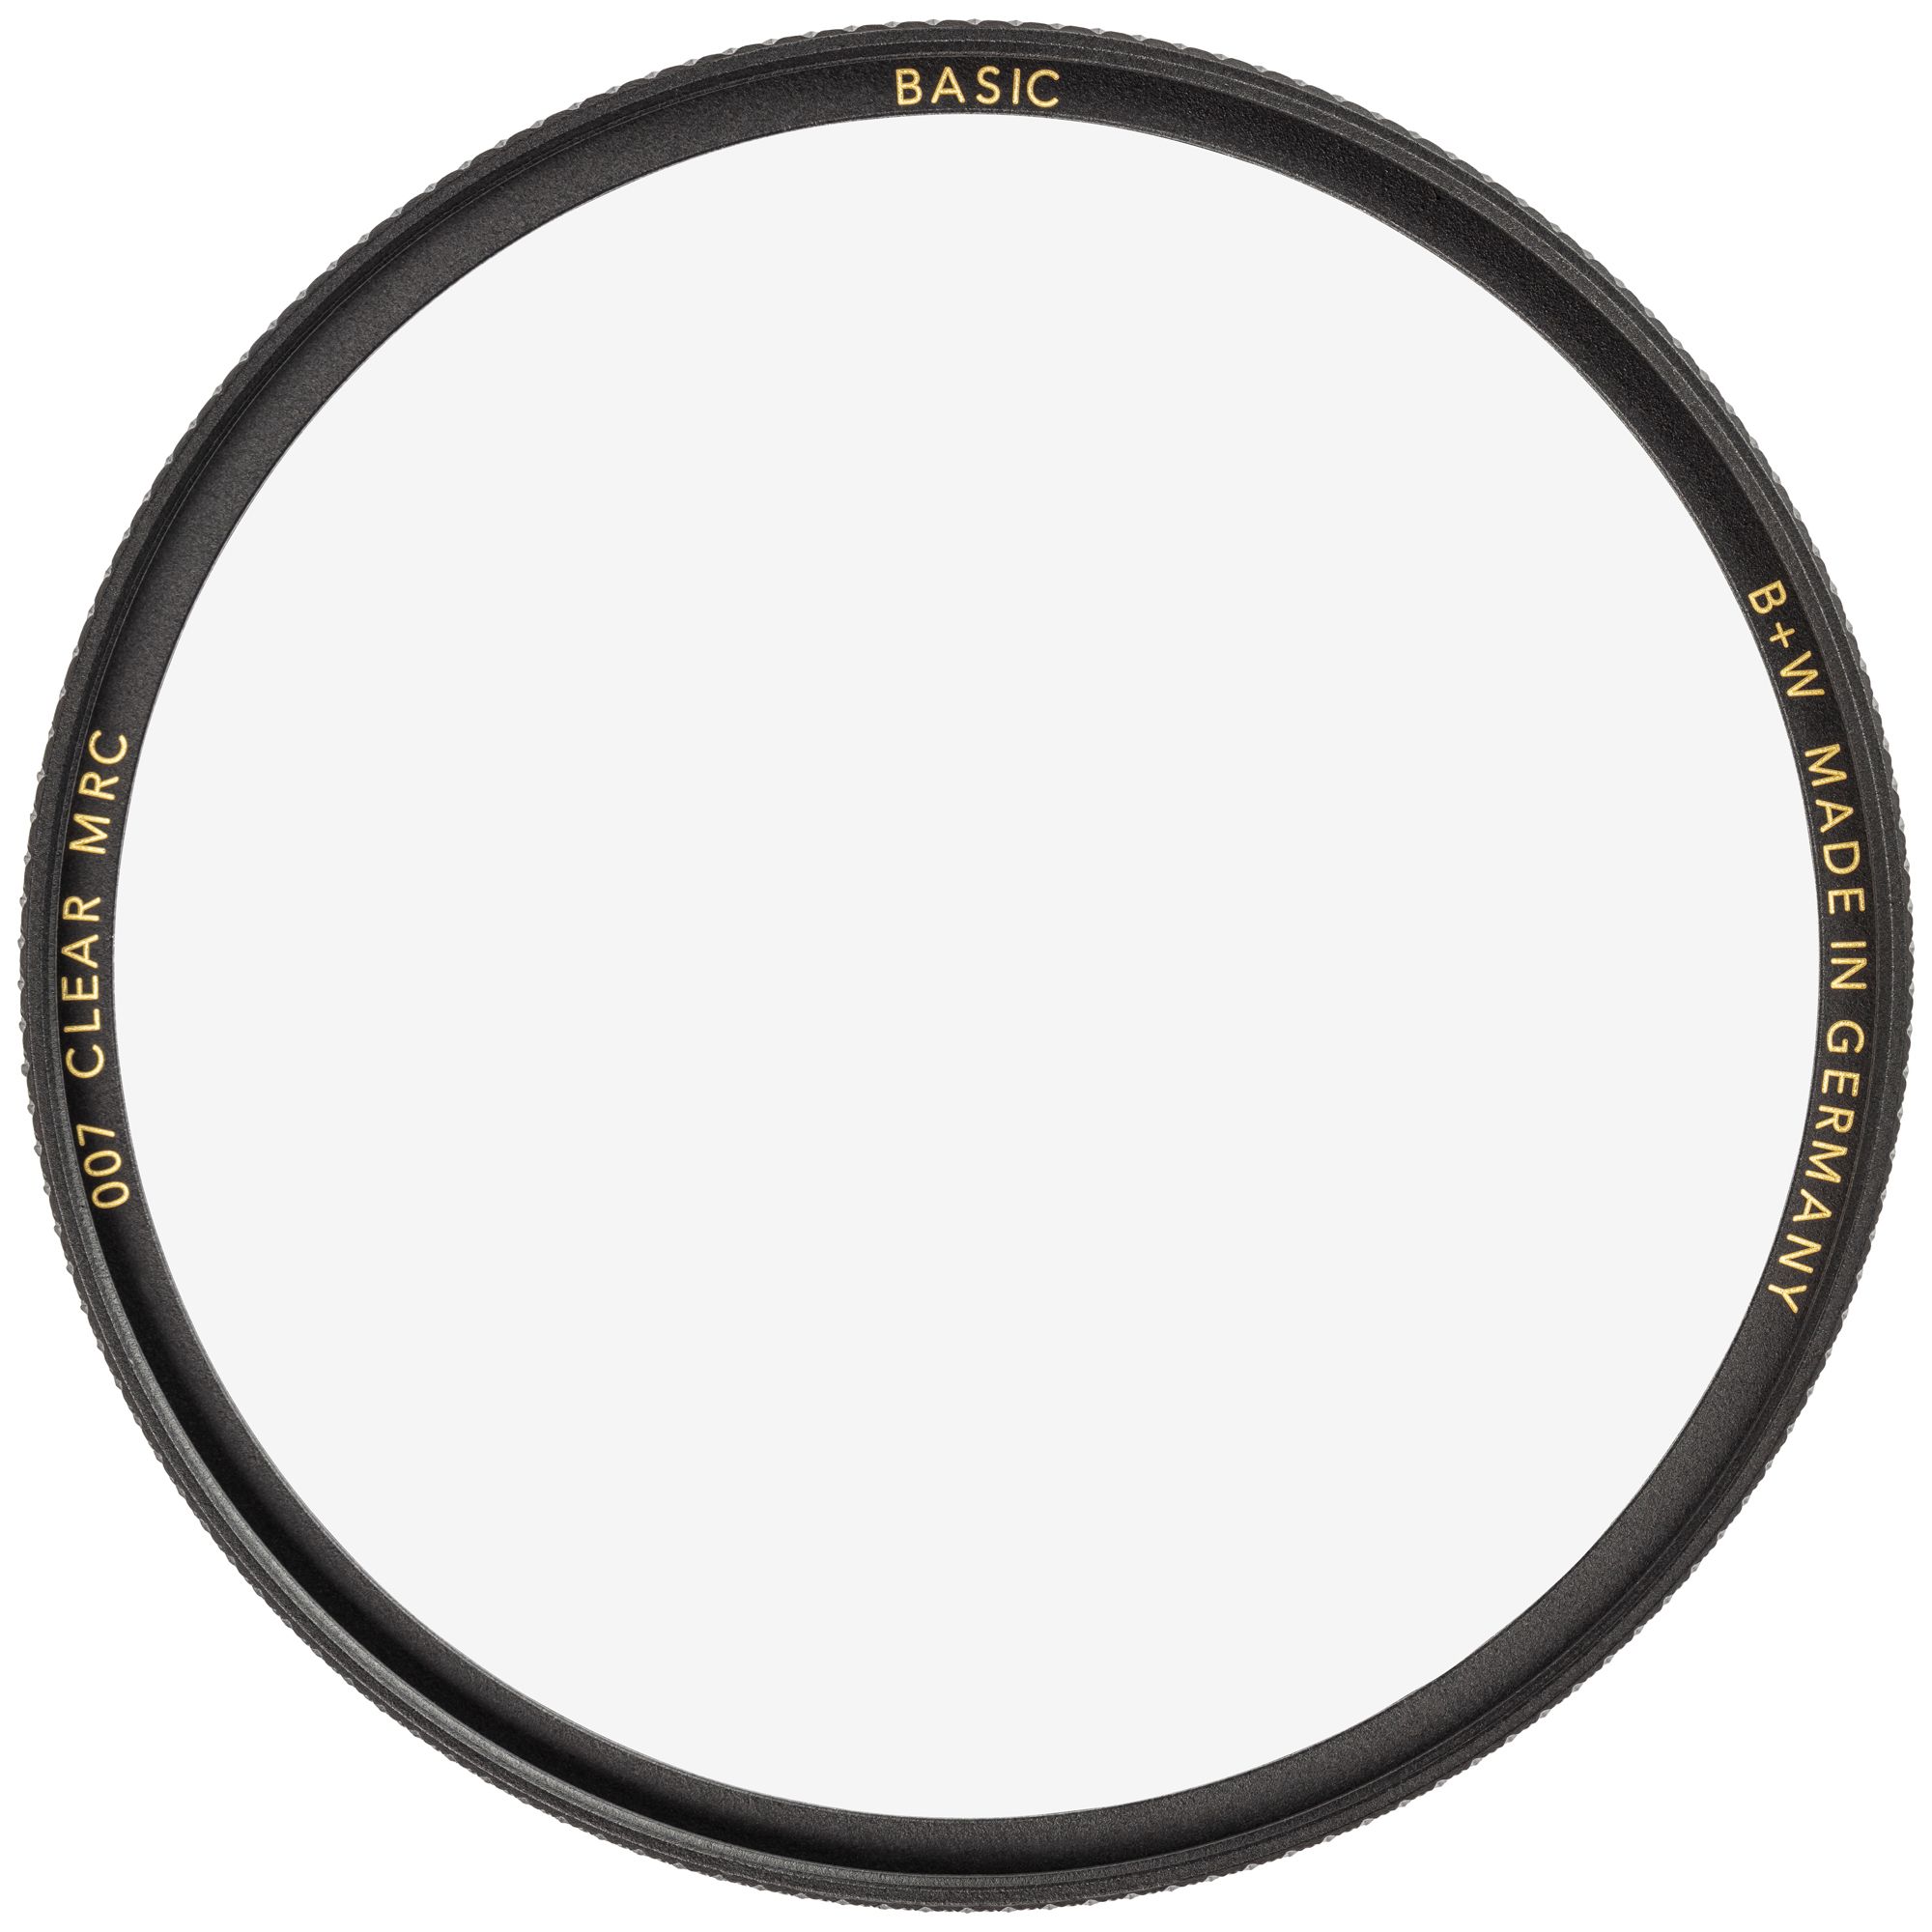 B+W Filter - Product - Basic - Front - 007_MRC_Clear.jpg